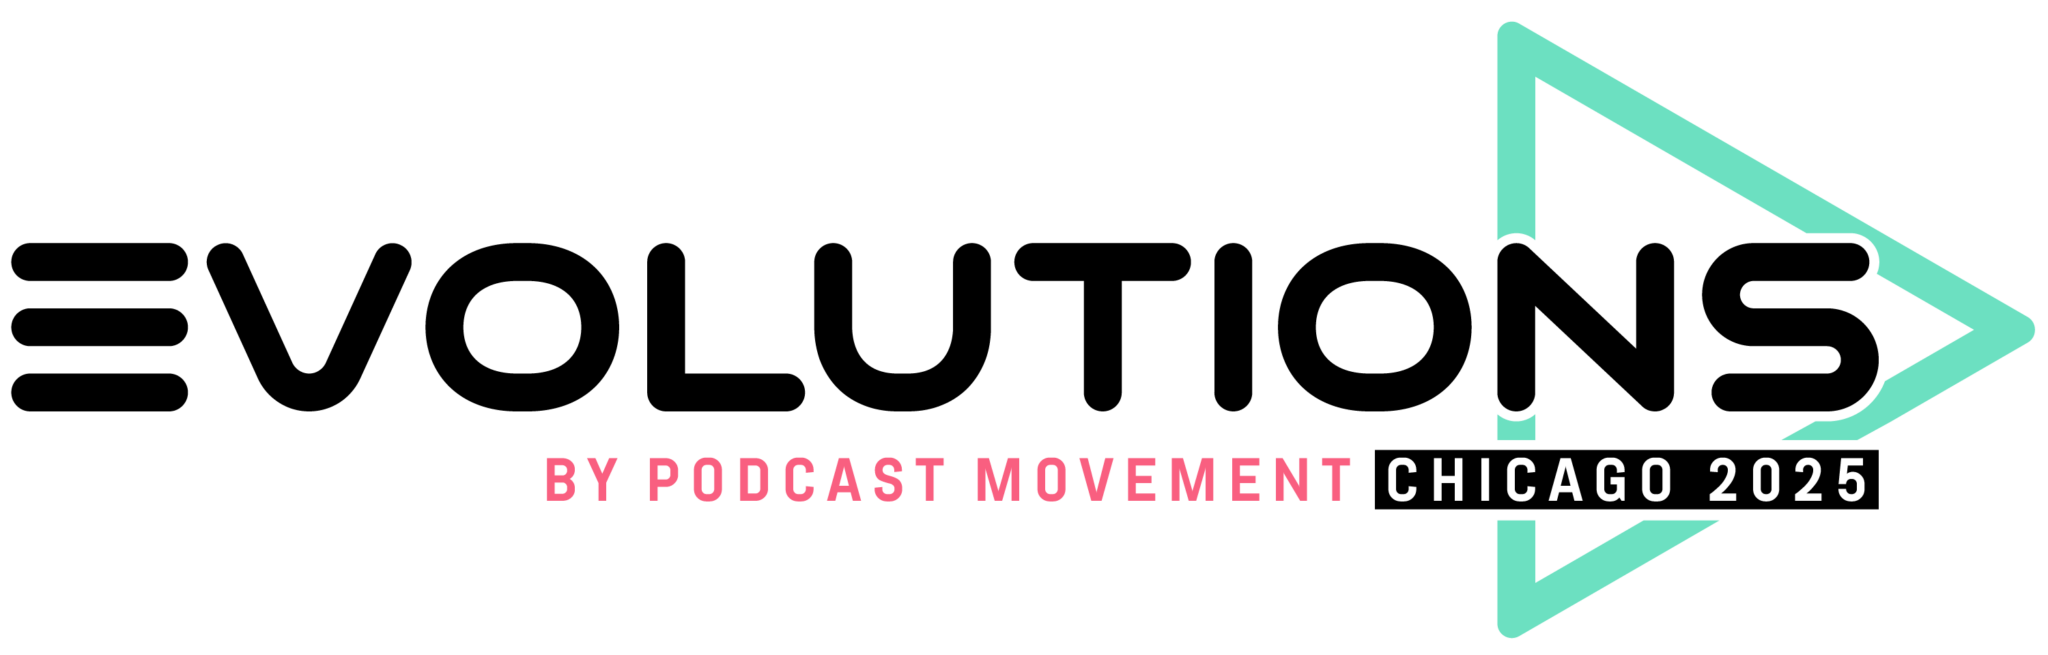 Future Events OnSite Rebooking Podcast Movement Podcasting News